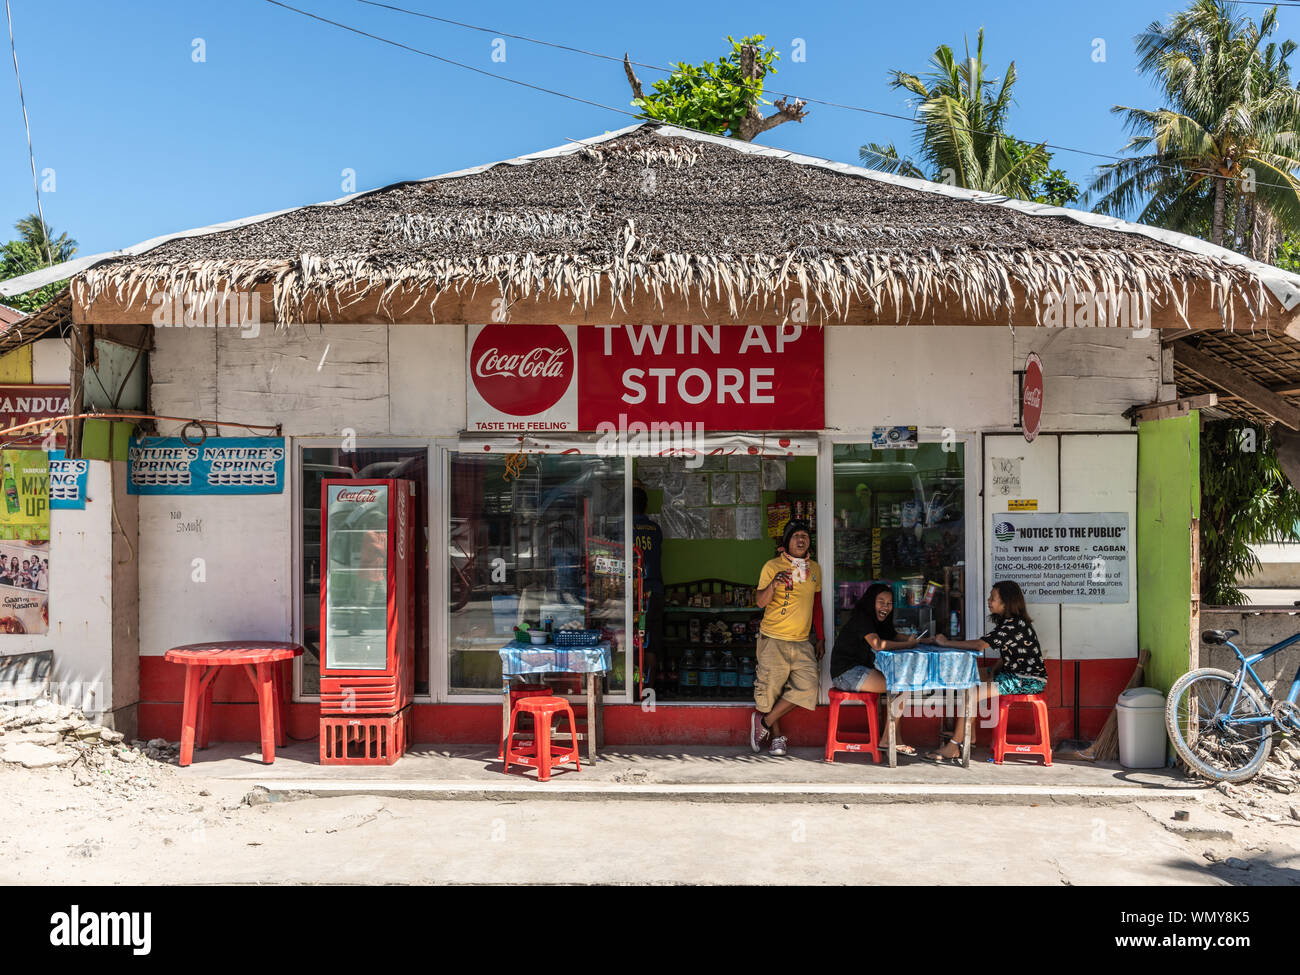 Manoc-Manoc, Boracay, Philippines - March 4, 2019: Twin Ap store is fast food and drink roadside hut with clients in front, straw roof, red tools, blu Stock Photo